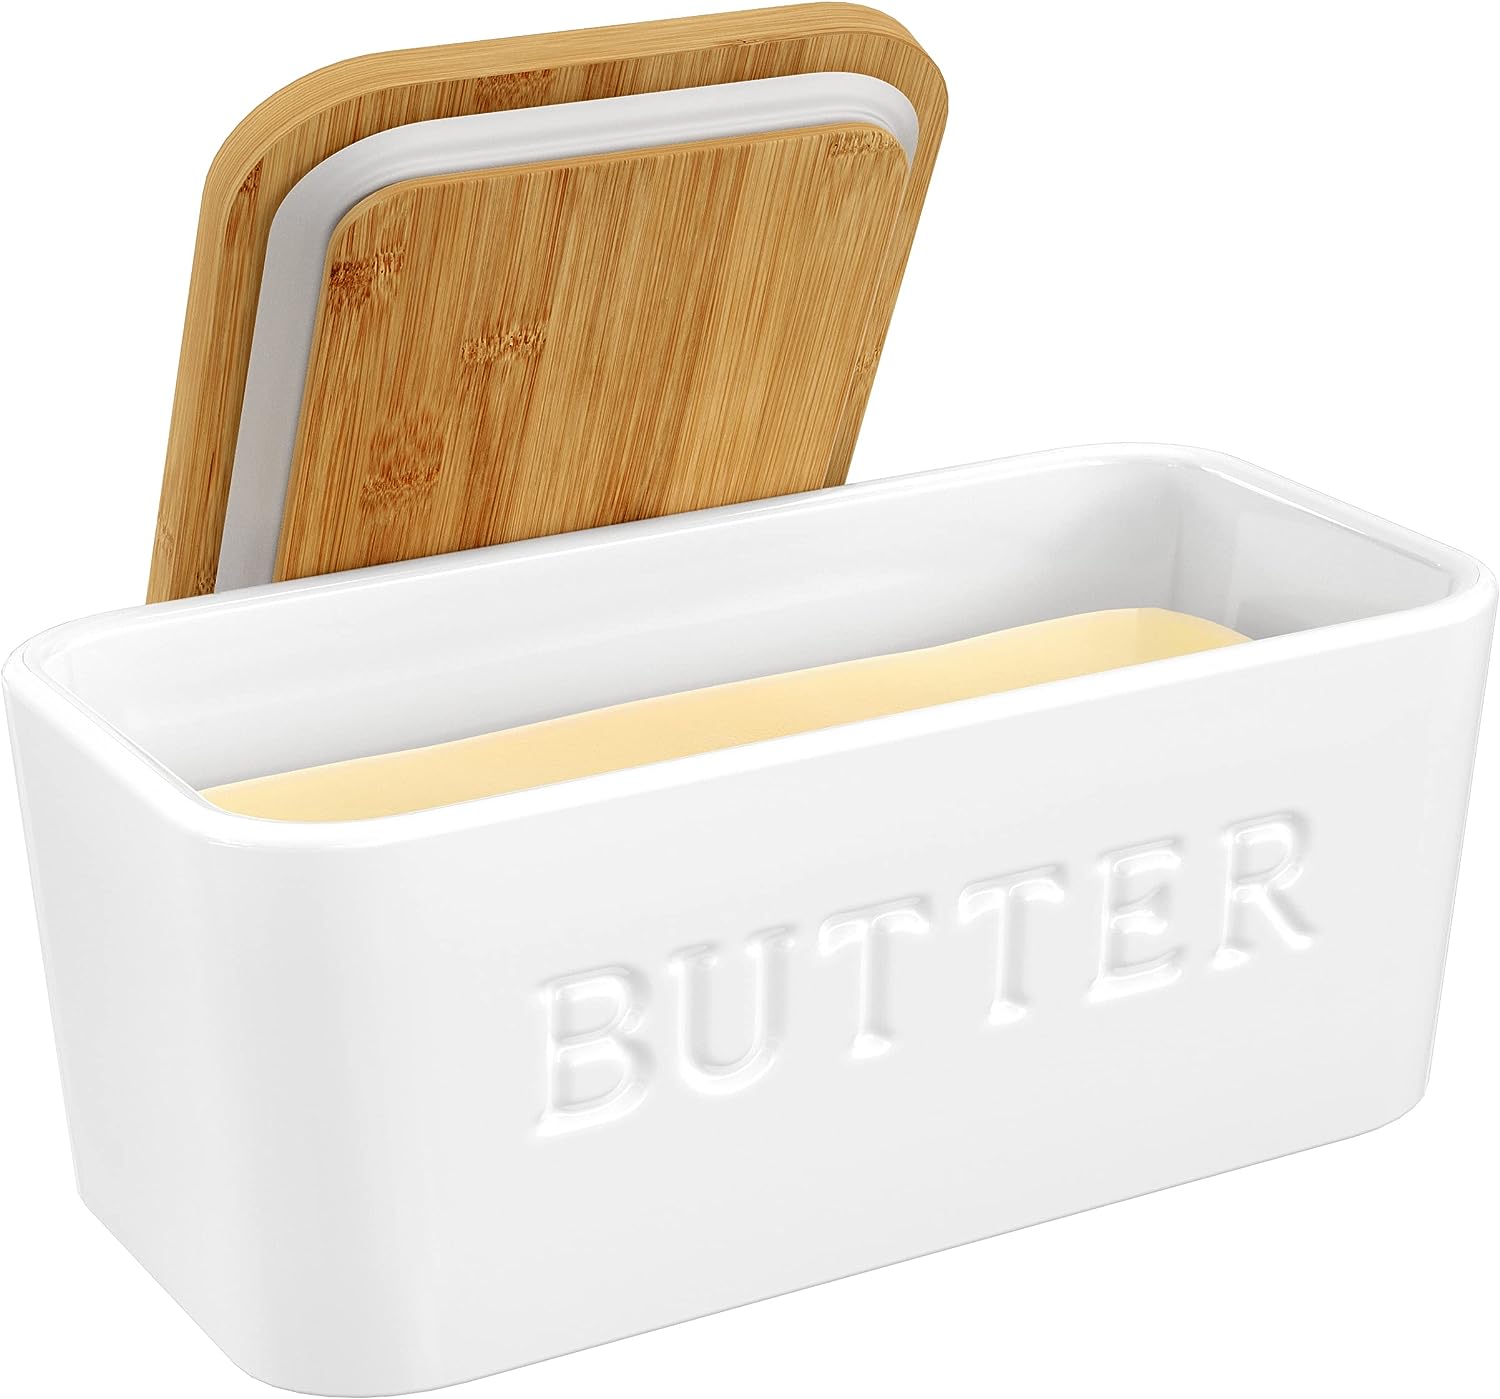 1set Ceramic Butter Dish with Bamboo Lid and Knife, Large Butter